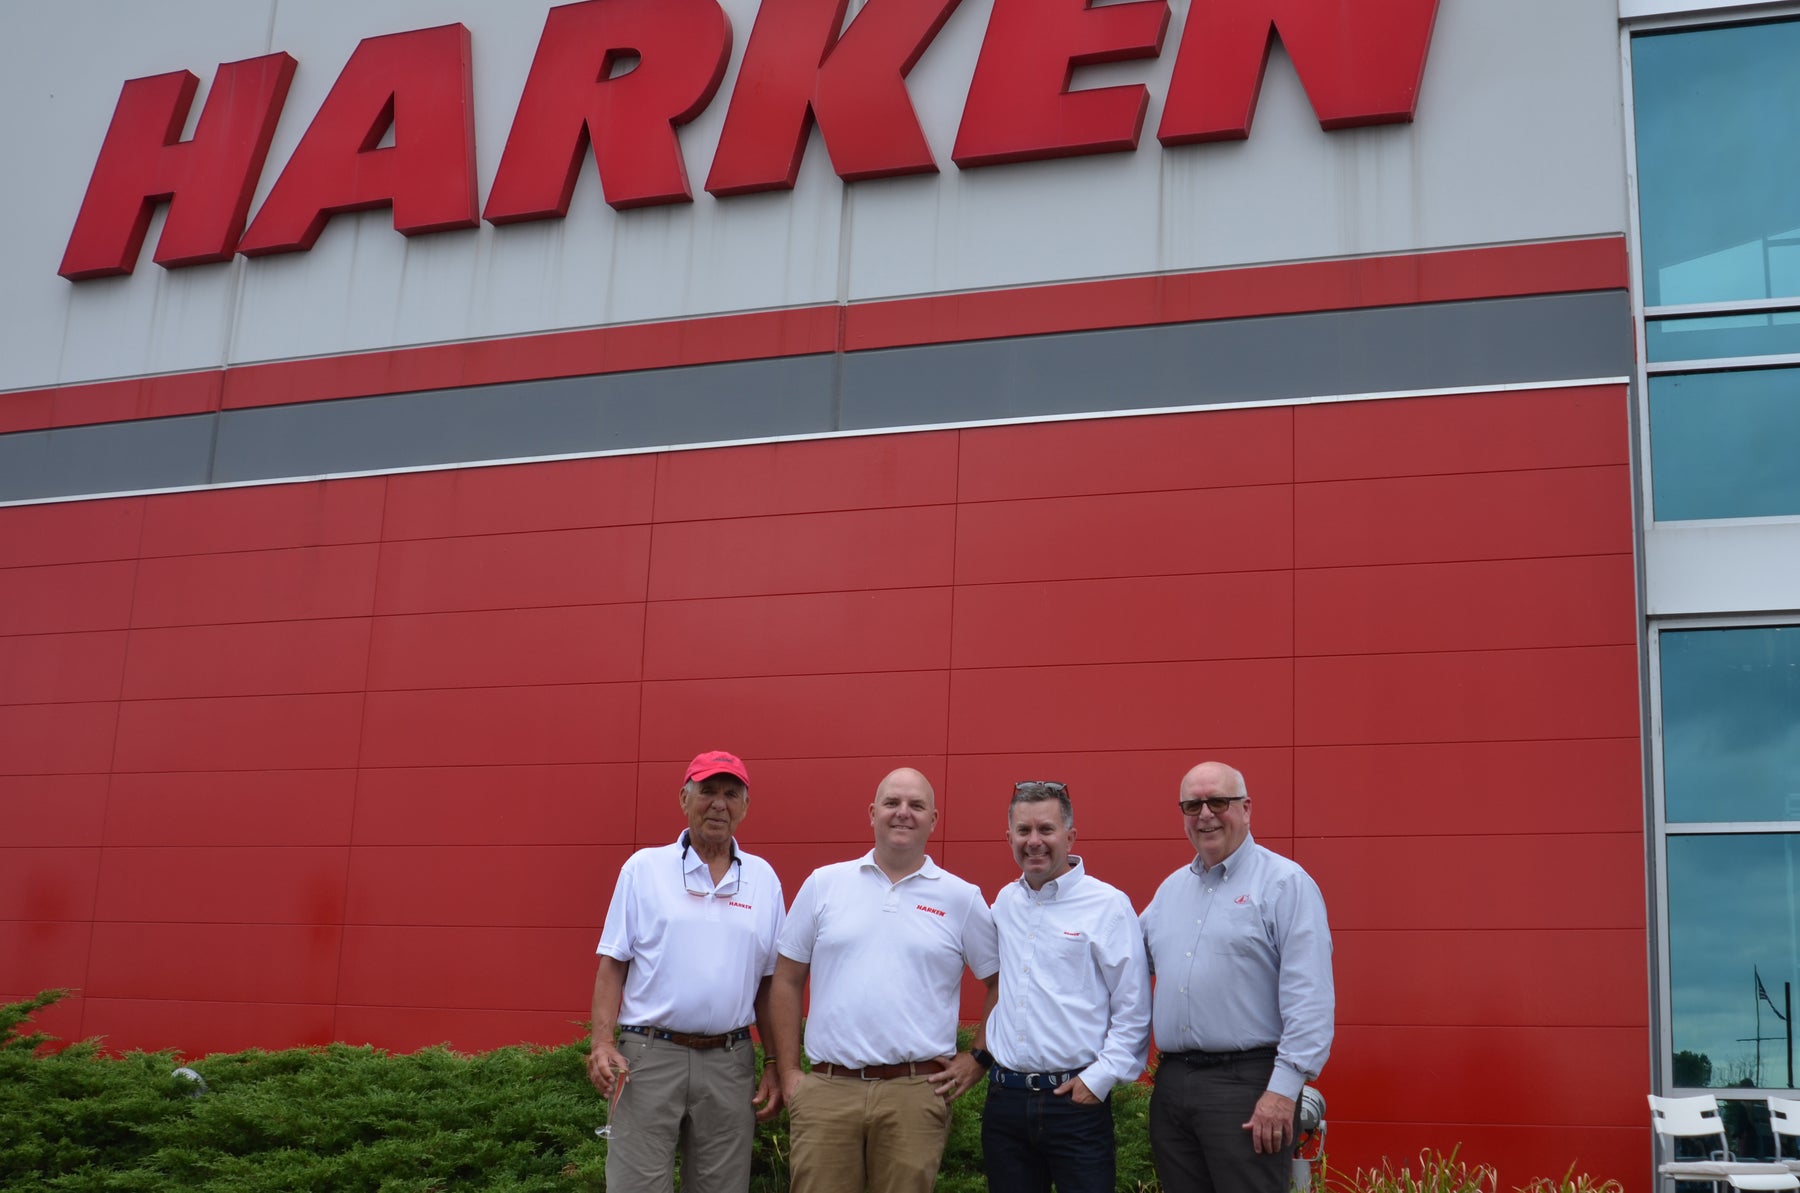 Fosters is proud to be a Harken company, and we look forward to continuing to bring you the best sailing products at a fair price through a new era in ownership of Harken.